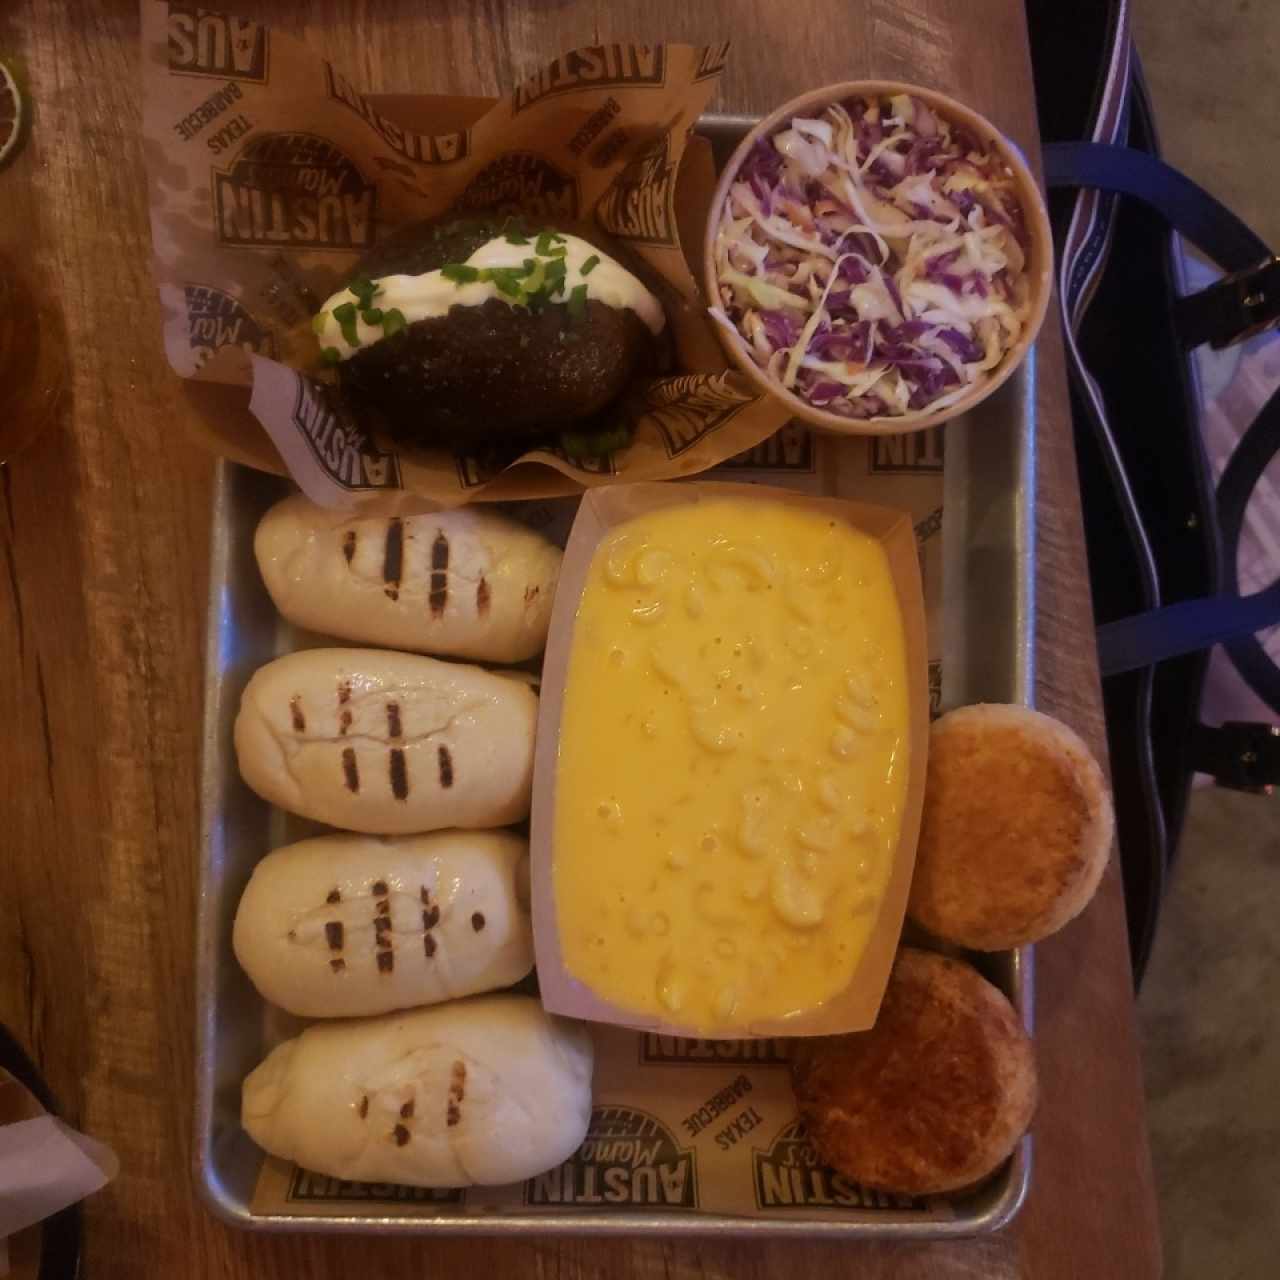 Sides - Coleslaw, Mc&Cheese, SmokedPotatoe, Biscuit and Bread